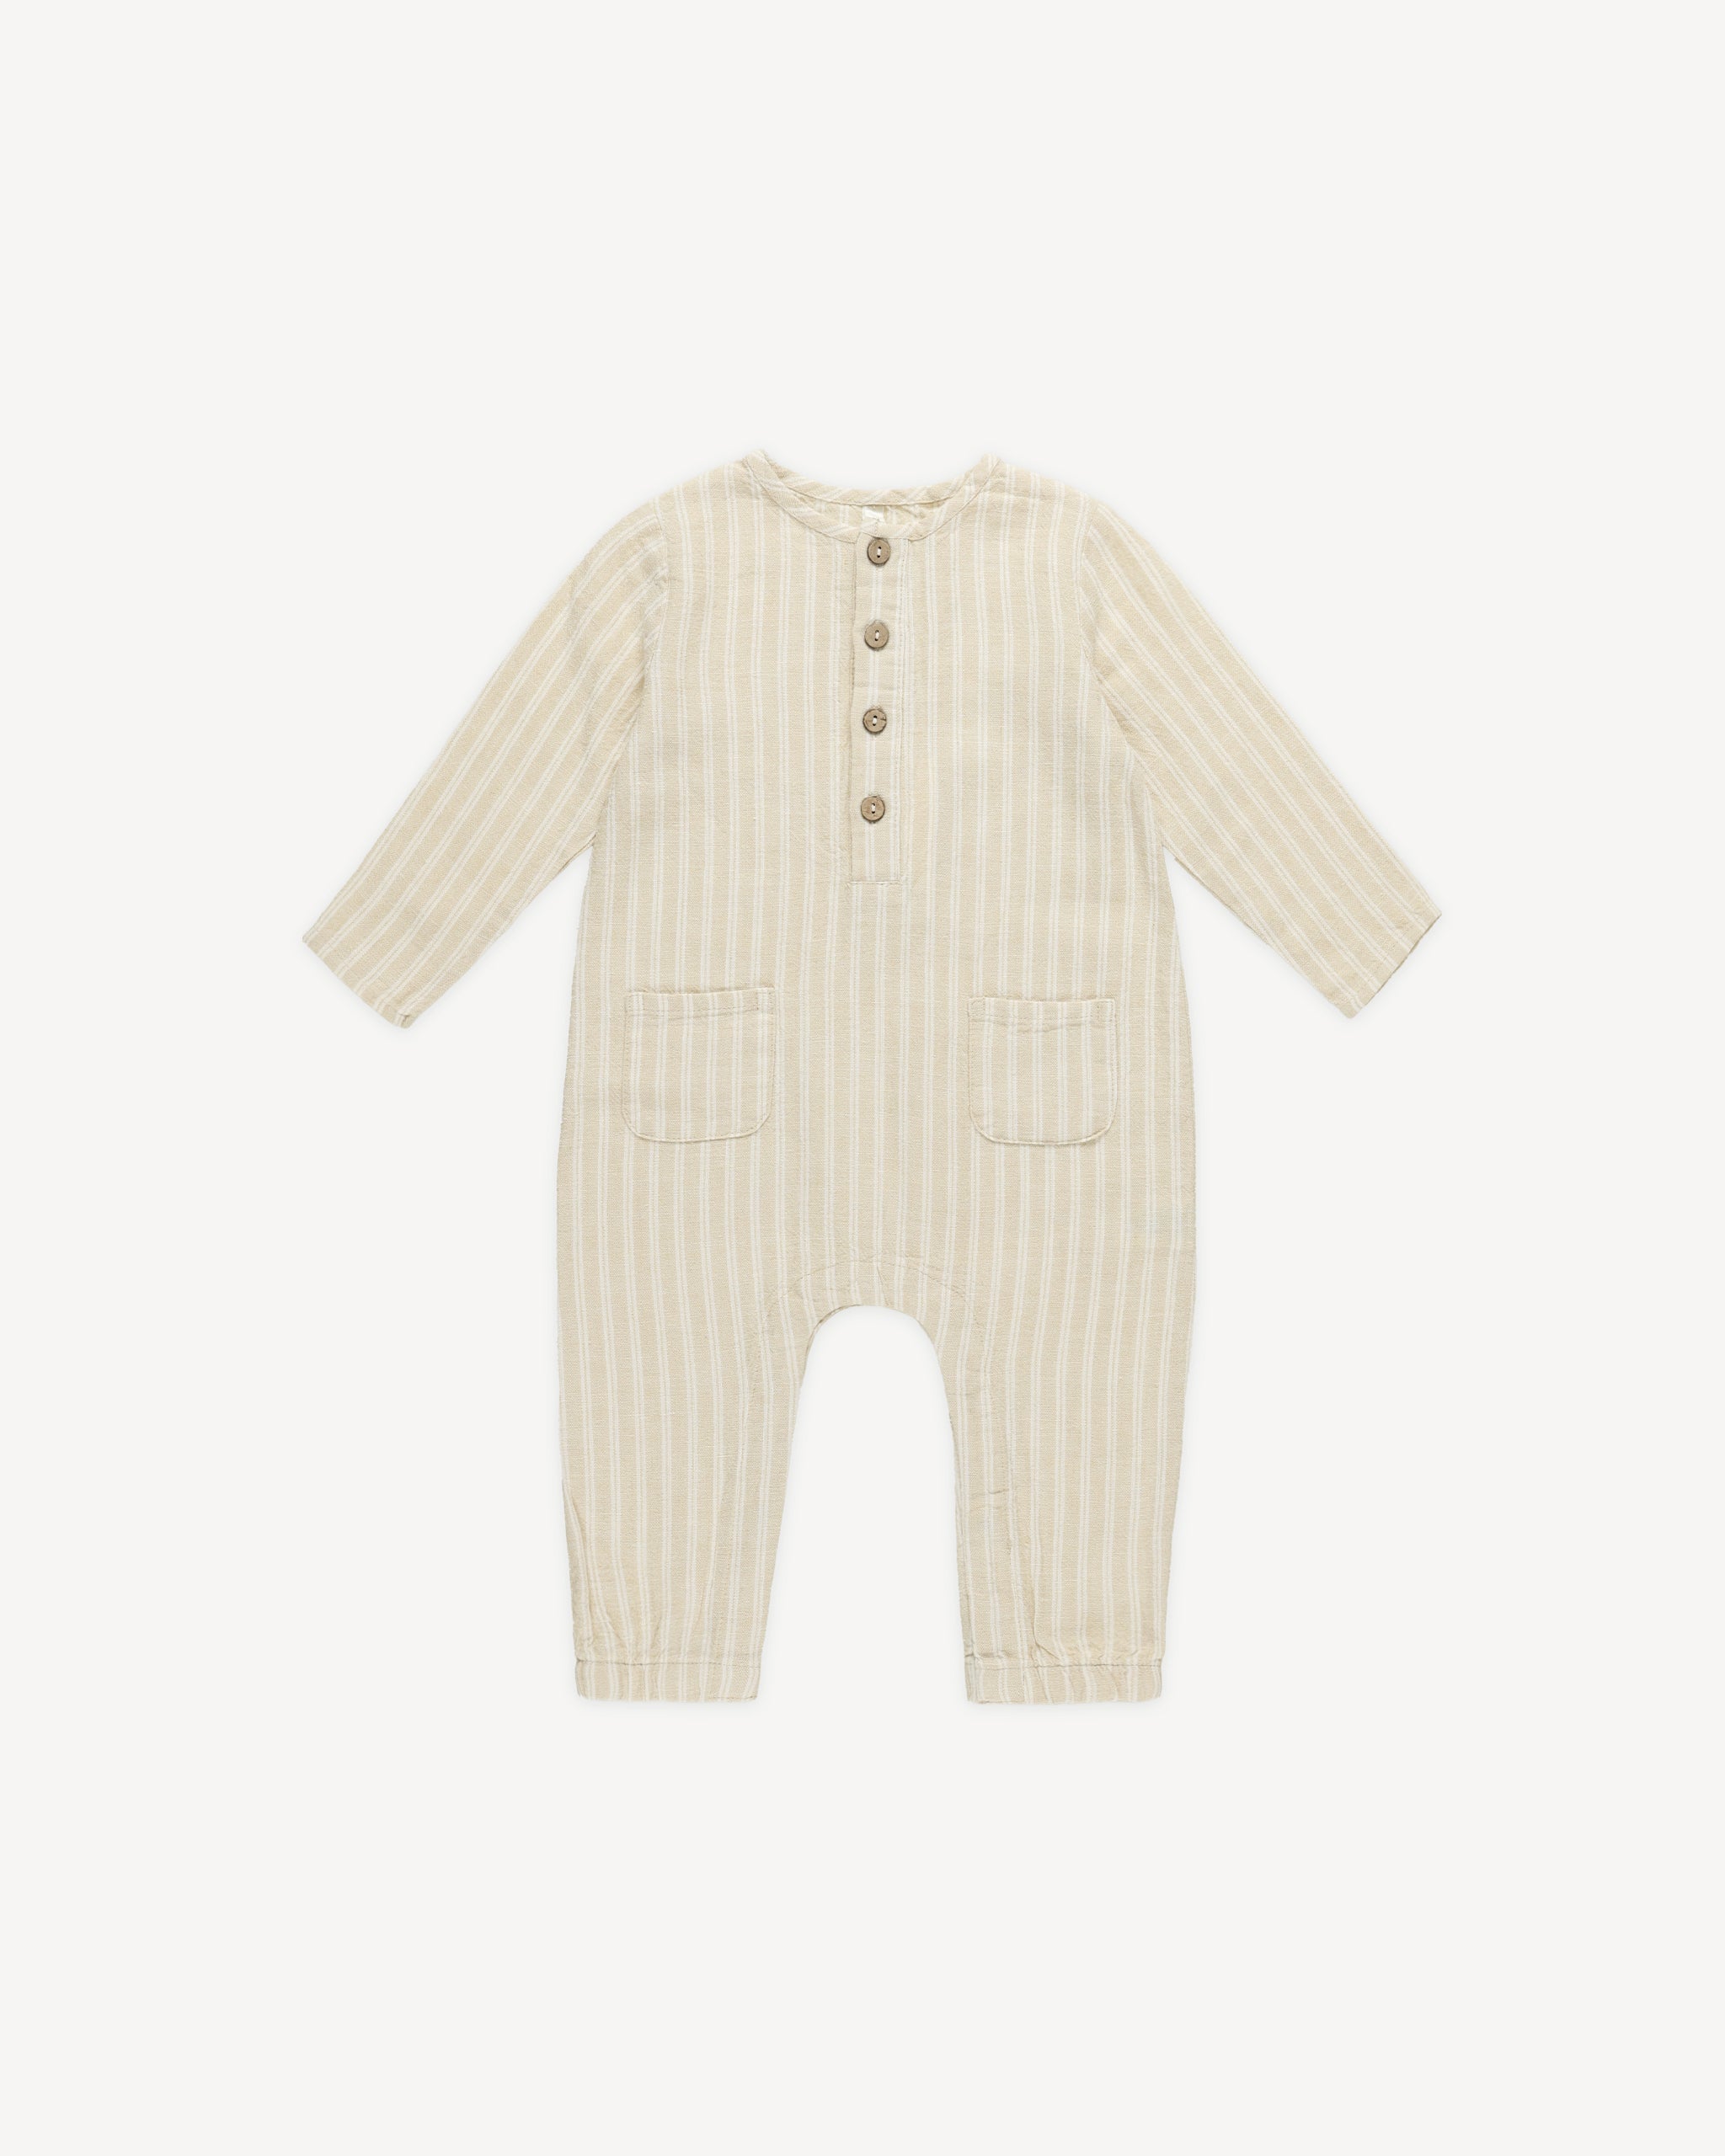 Long Sleeve Woven Jumpsuit || Champagne Stripe - Rylee + Cru | Kids Clothes | Trendy Baby Clothes | Modern Infant Outfits |